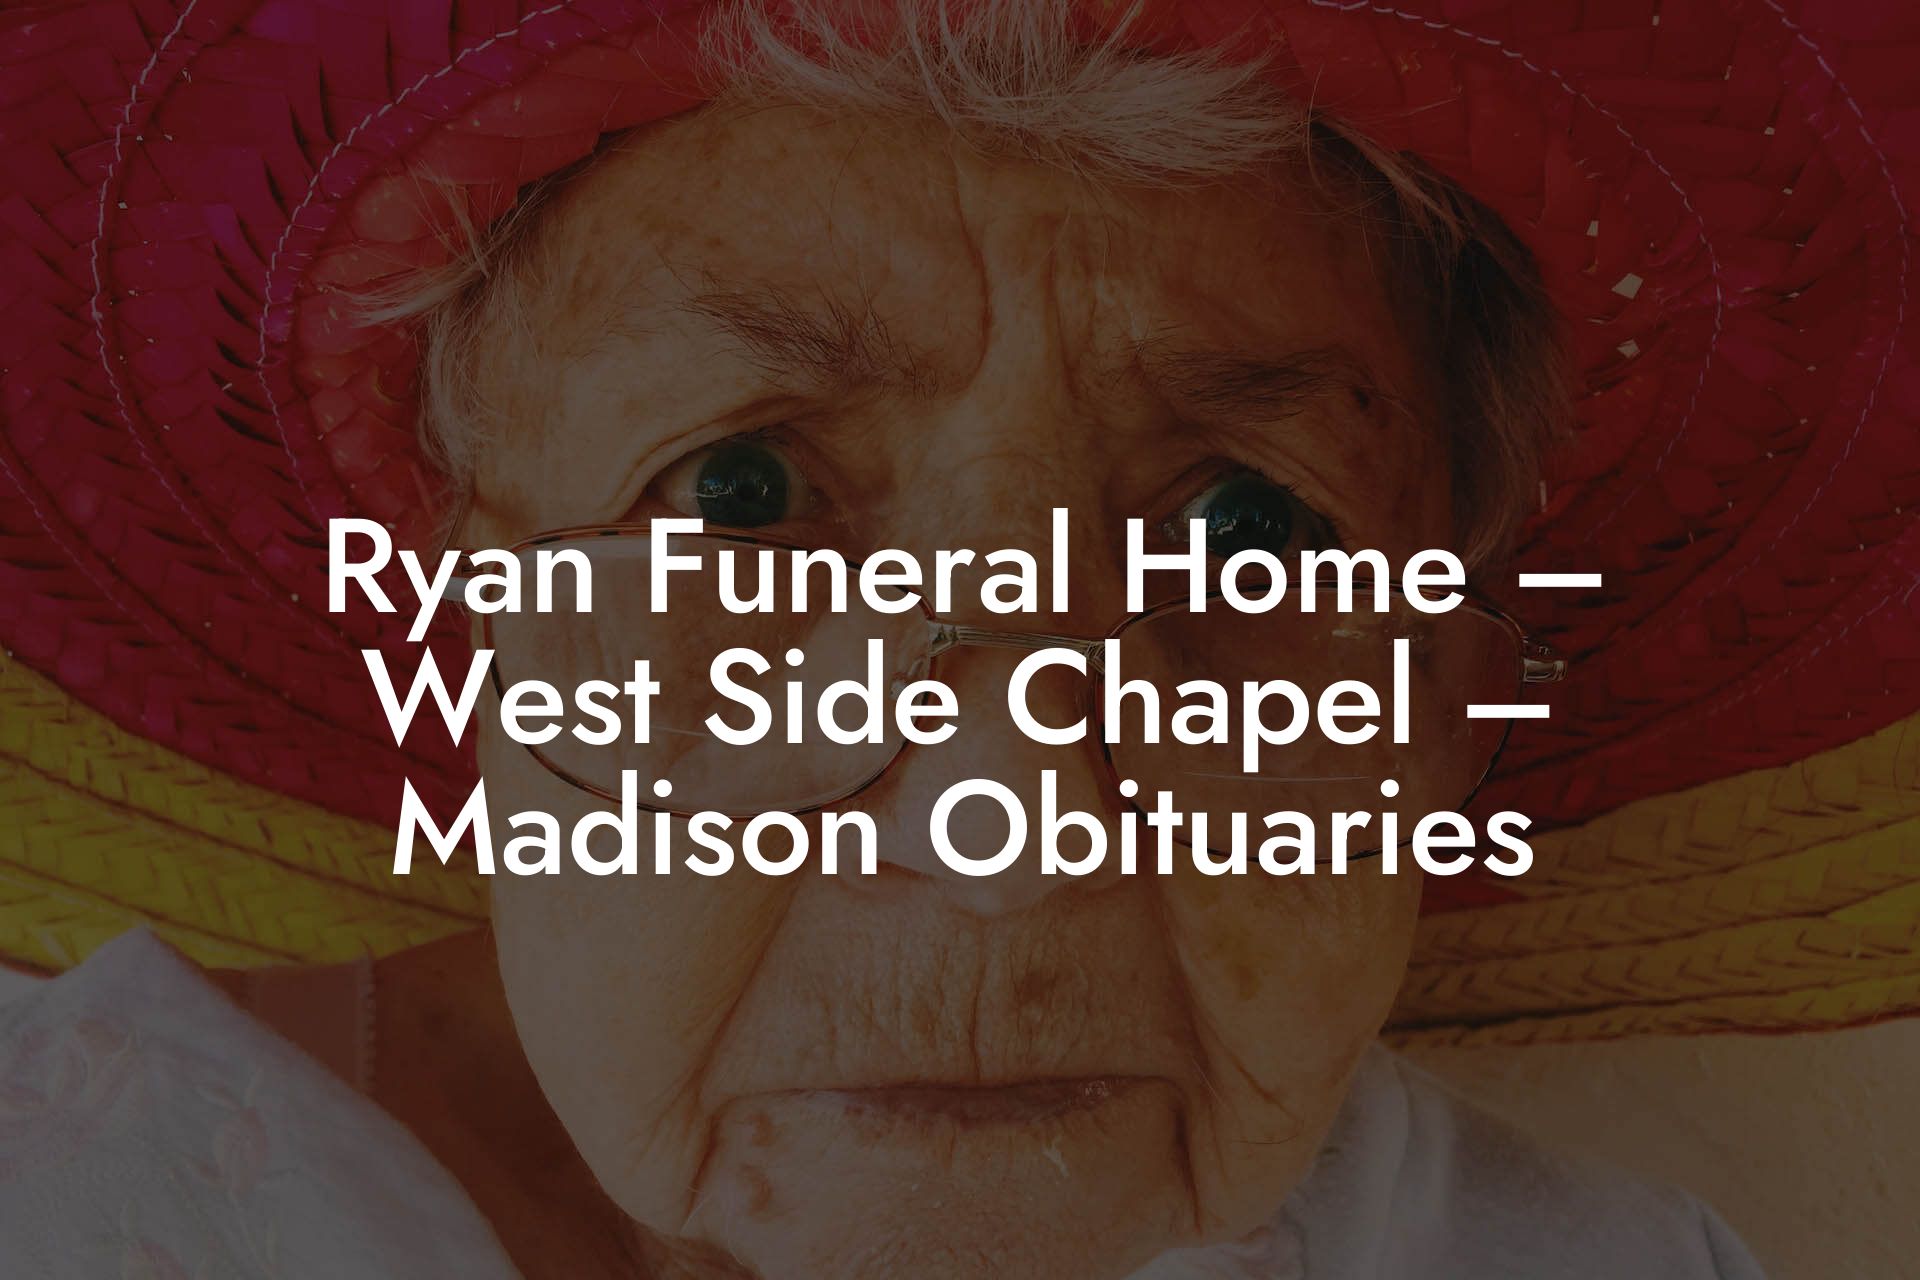 Ryan Funeral Home – West Side Chapel – Madison Obituaries